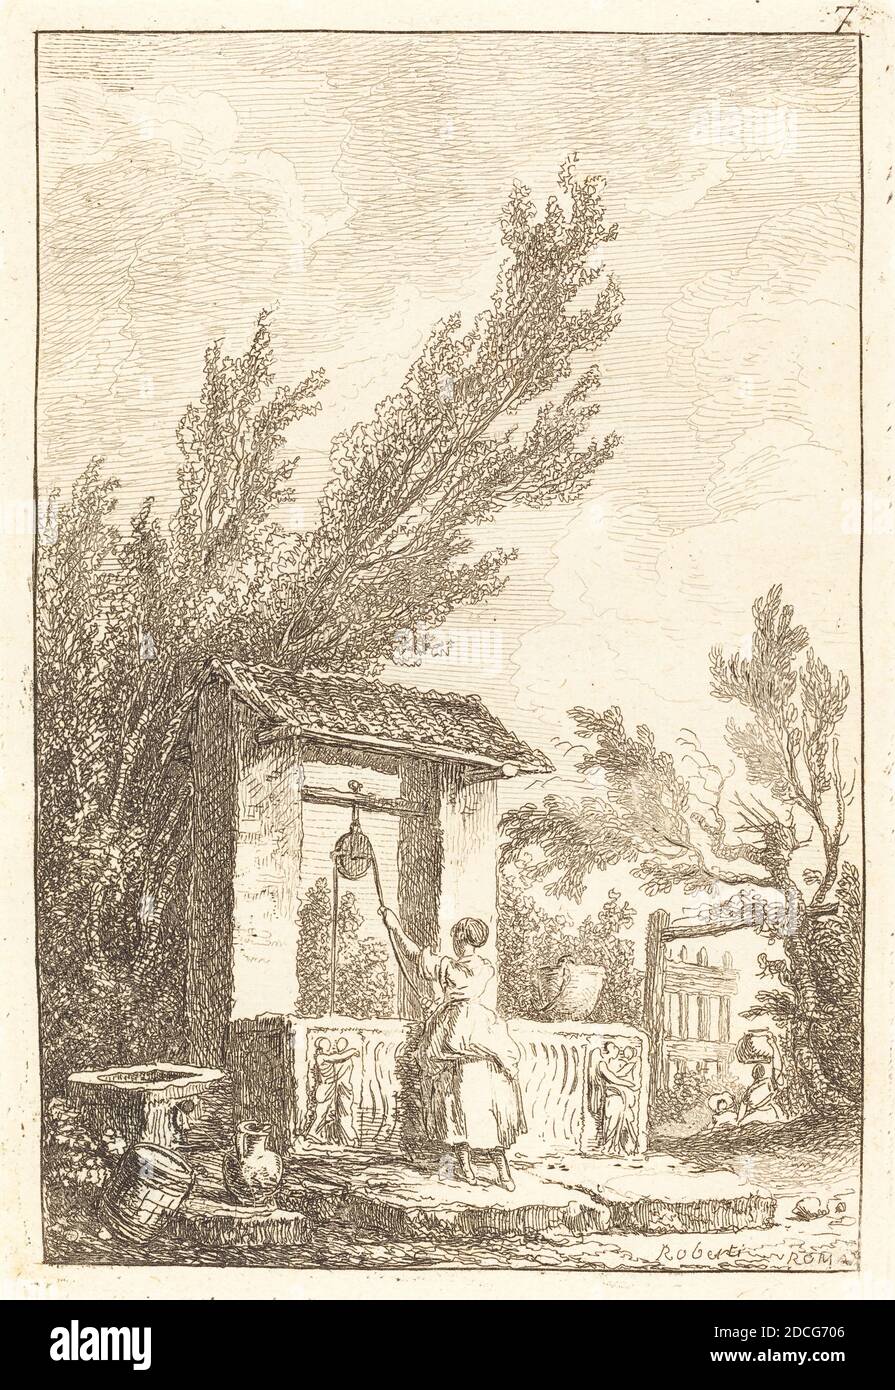 Hubert Robert, (artist), French, 1733 - 1808, The Well, Les Soirees de Rome (Evenings in Rome):pl.7, (series), etching Stock Photo